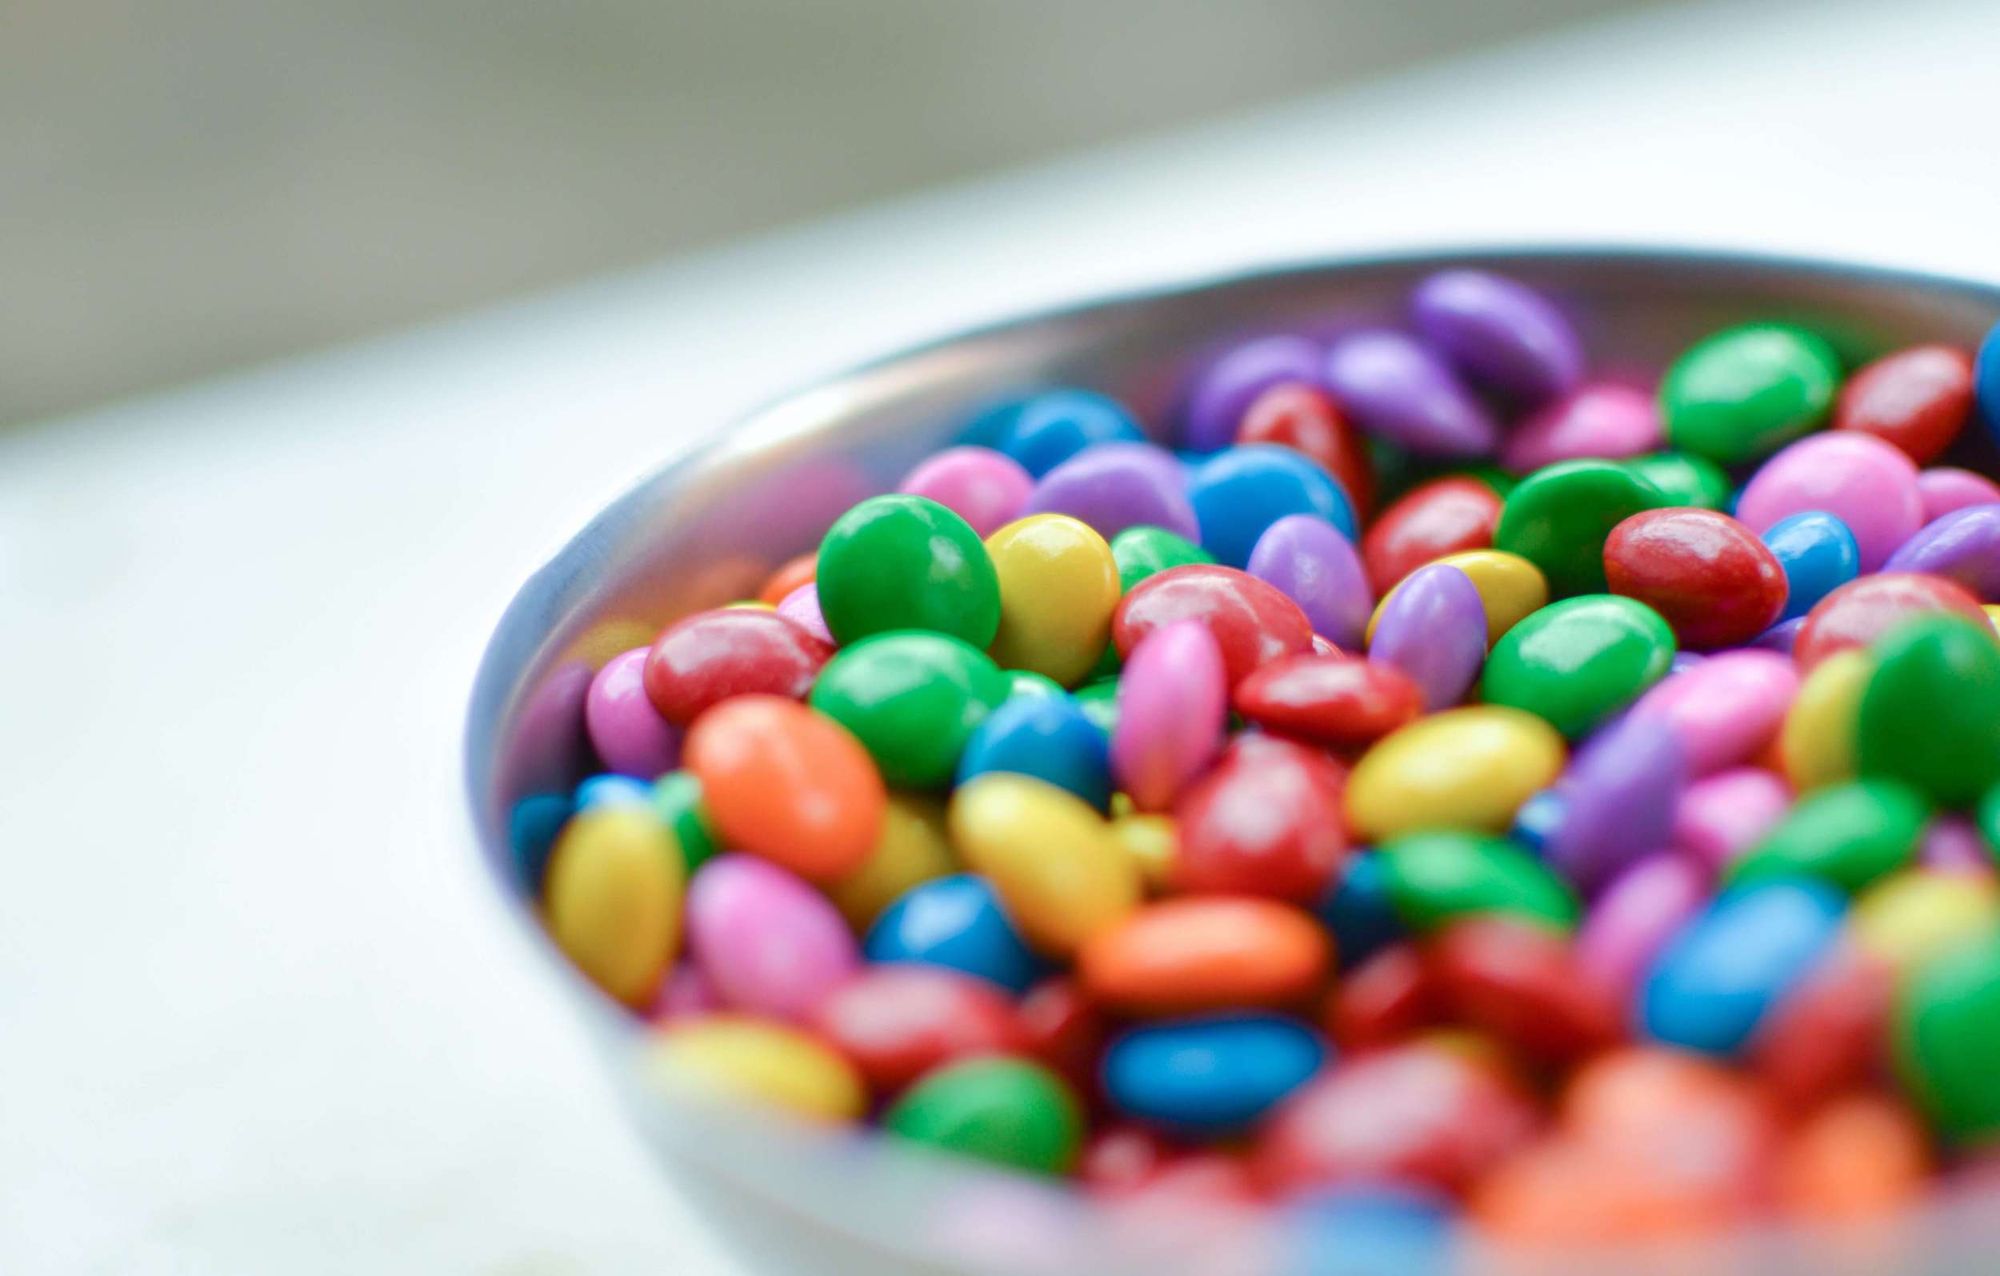 Close-up photo of a large ceramic bowl of brightly coloured M&Ms.